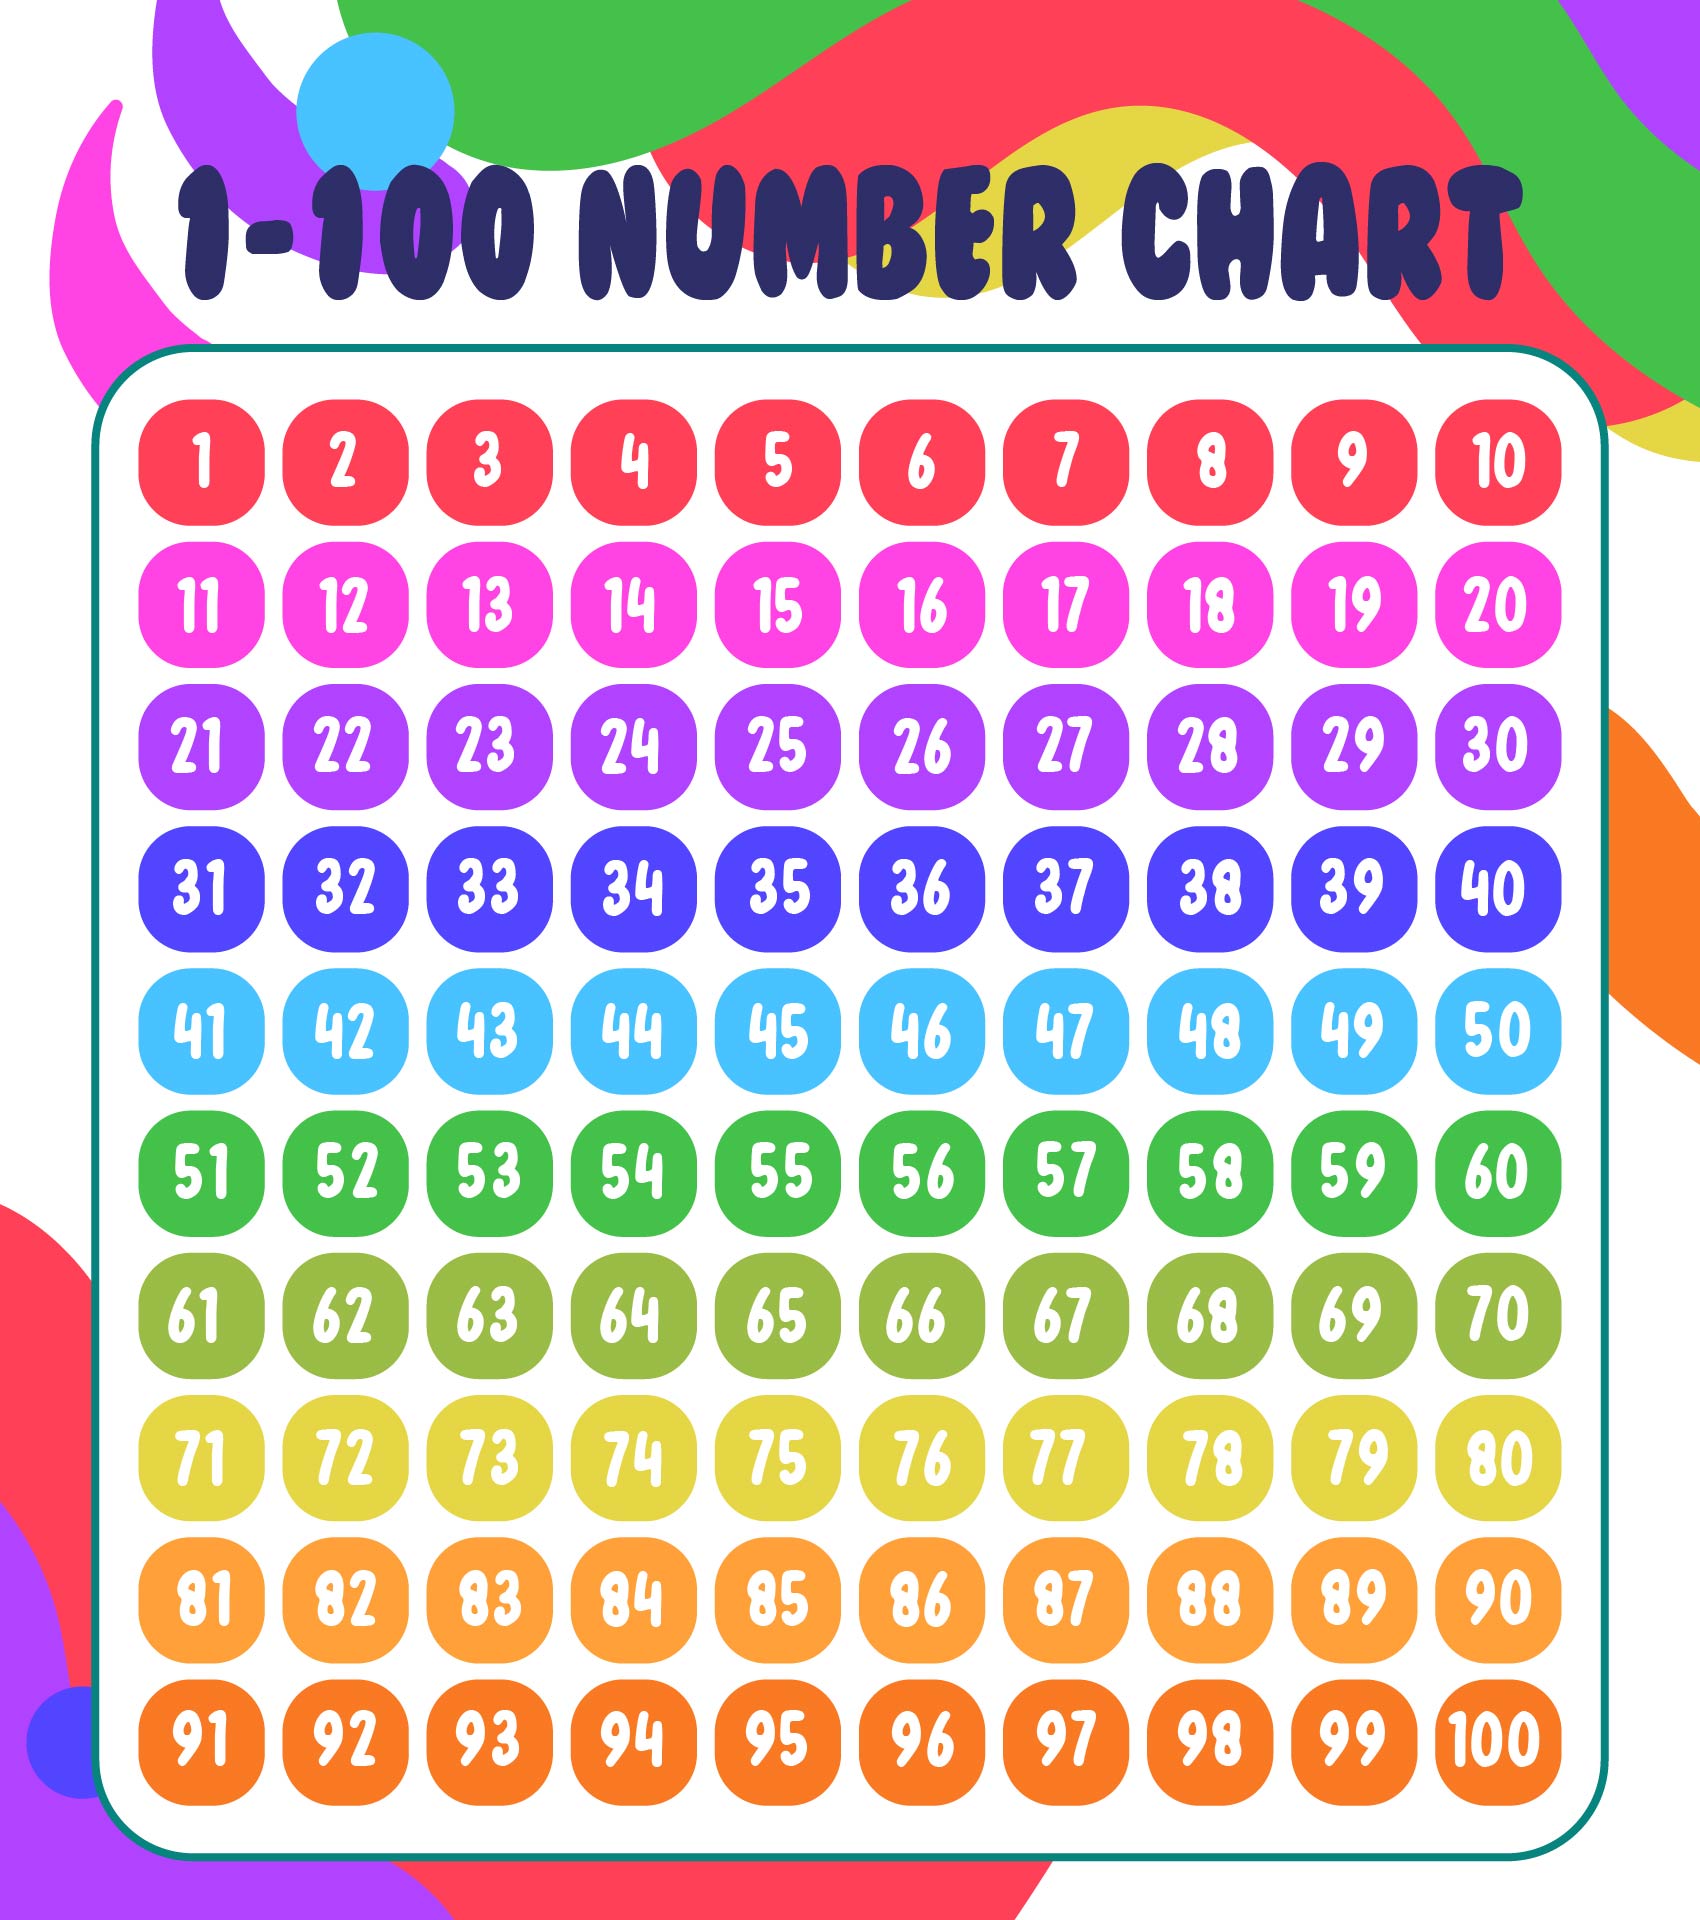 1-100 Number Chart Printable In Colors